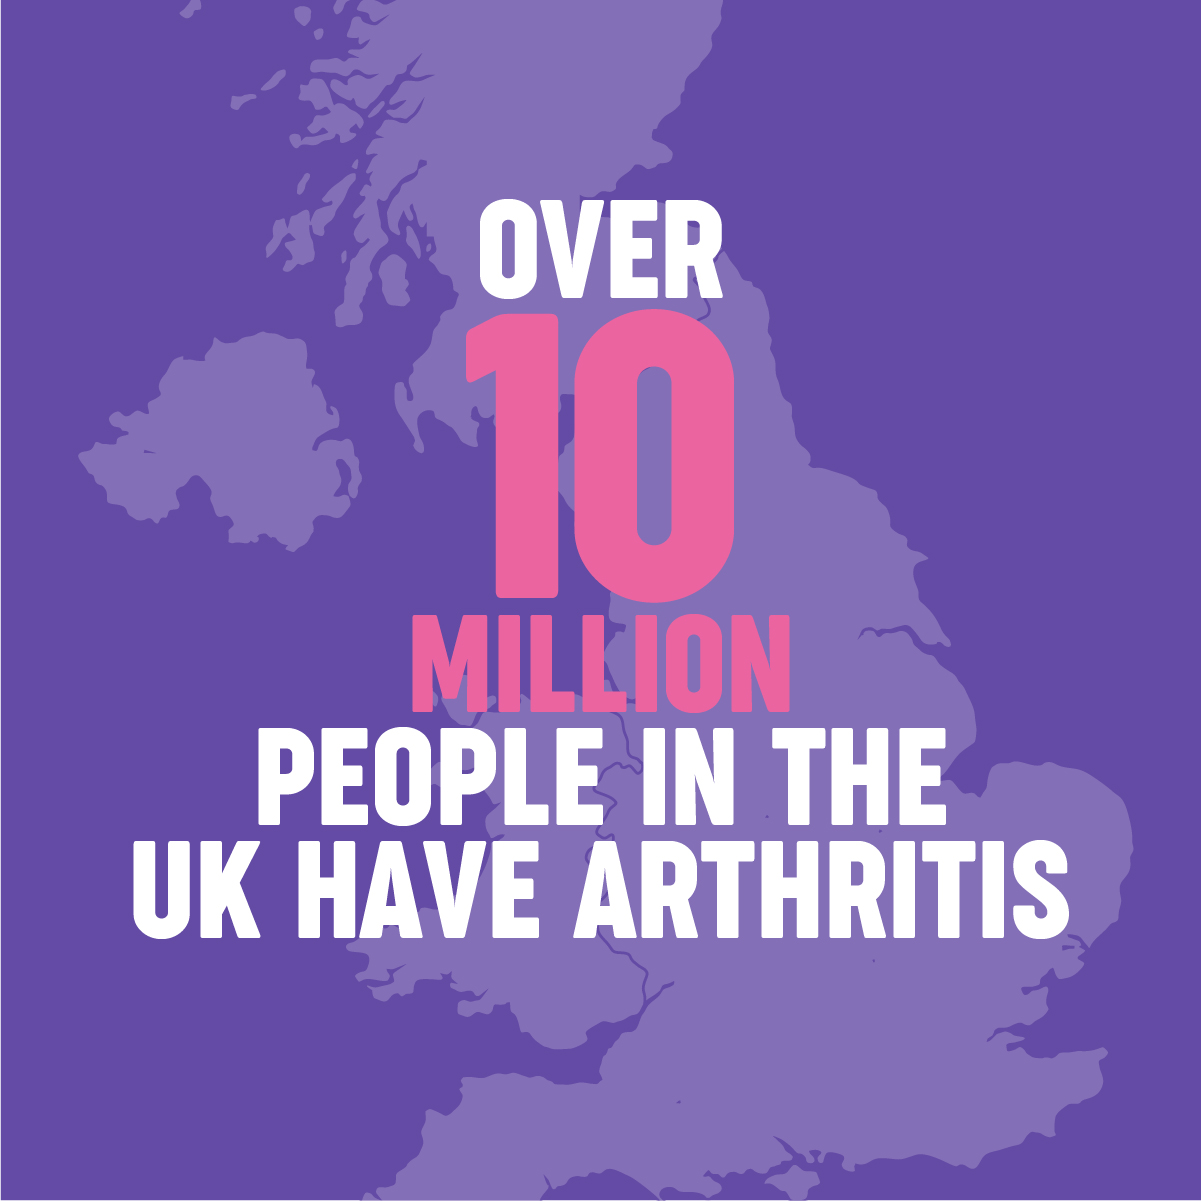 Over 10 million people in the UK have arthritis.